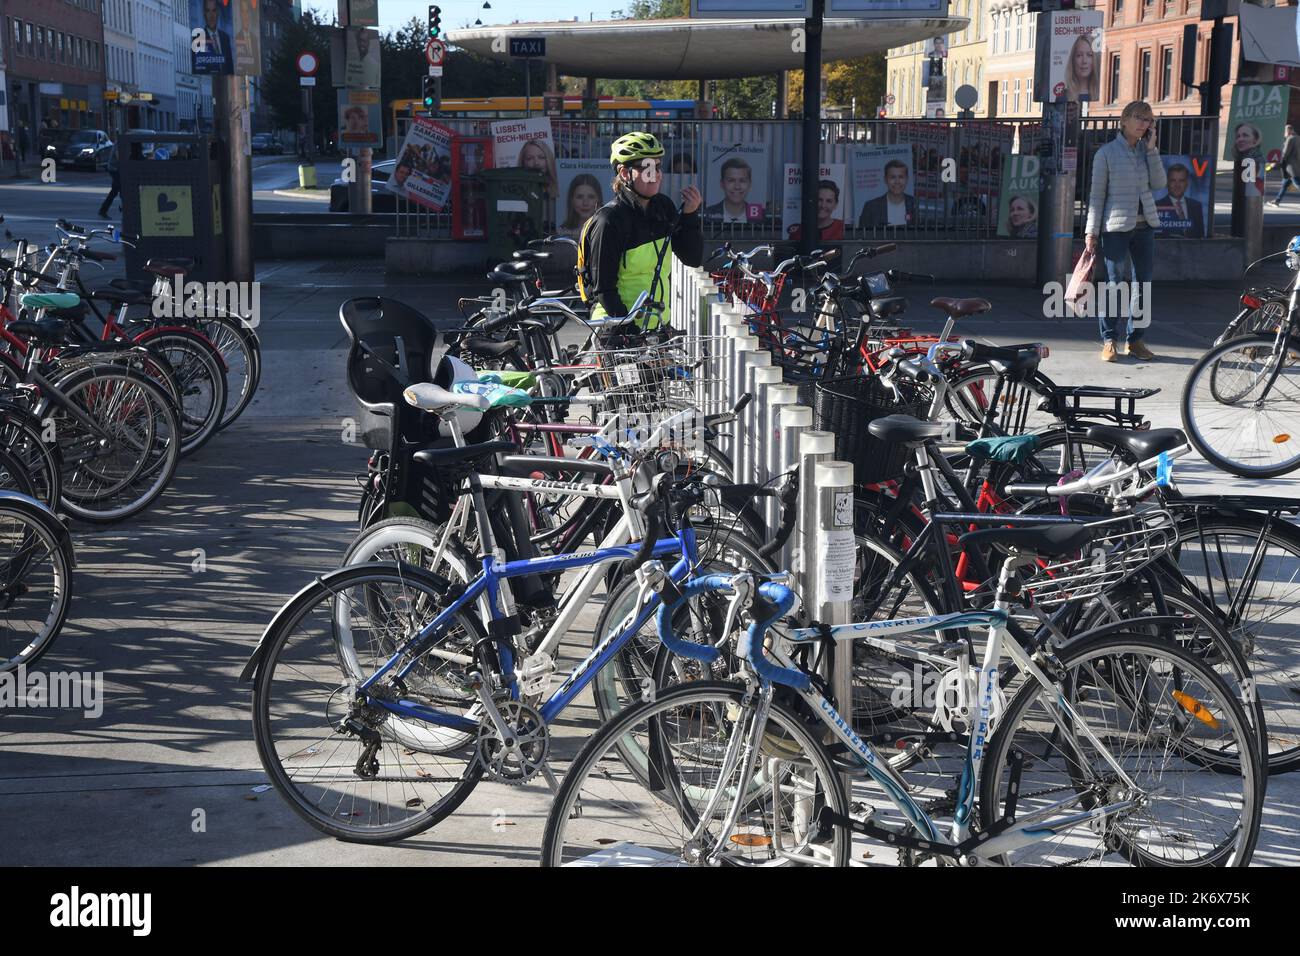 Copenhagen /Denmark/16 October 2022 / Denamrk as biker nation danes ride bicycles on job and fitness and hobby and as transport iinc apital and whole nation and danes also ride on bike lkanes and parted on bike parking place in capital.in Copenhagen.(Photo..Francis Joseph Dean/Dean Pictures. Stock Photo